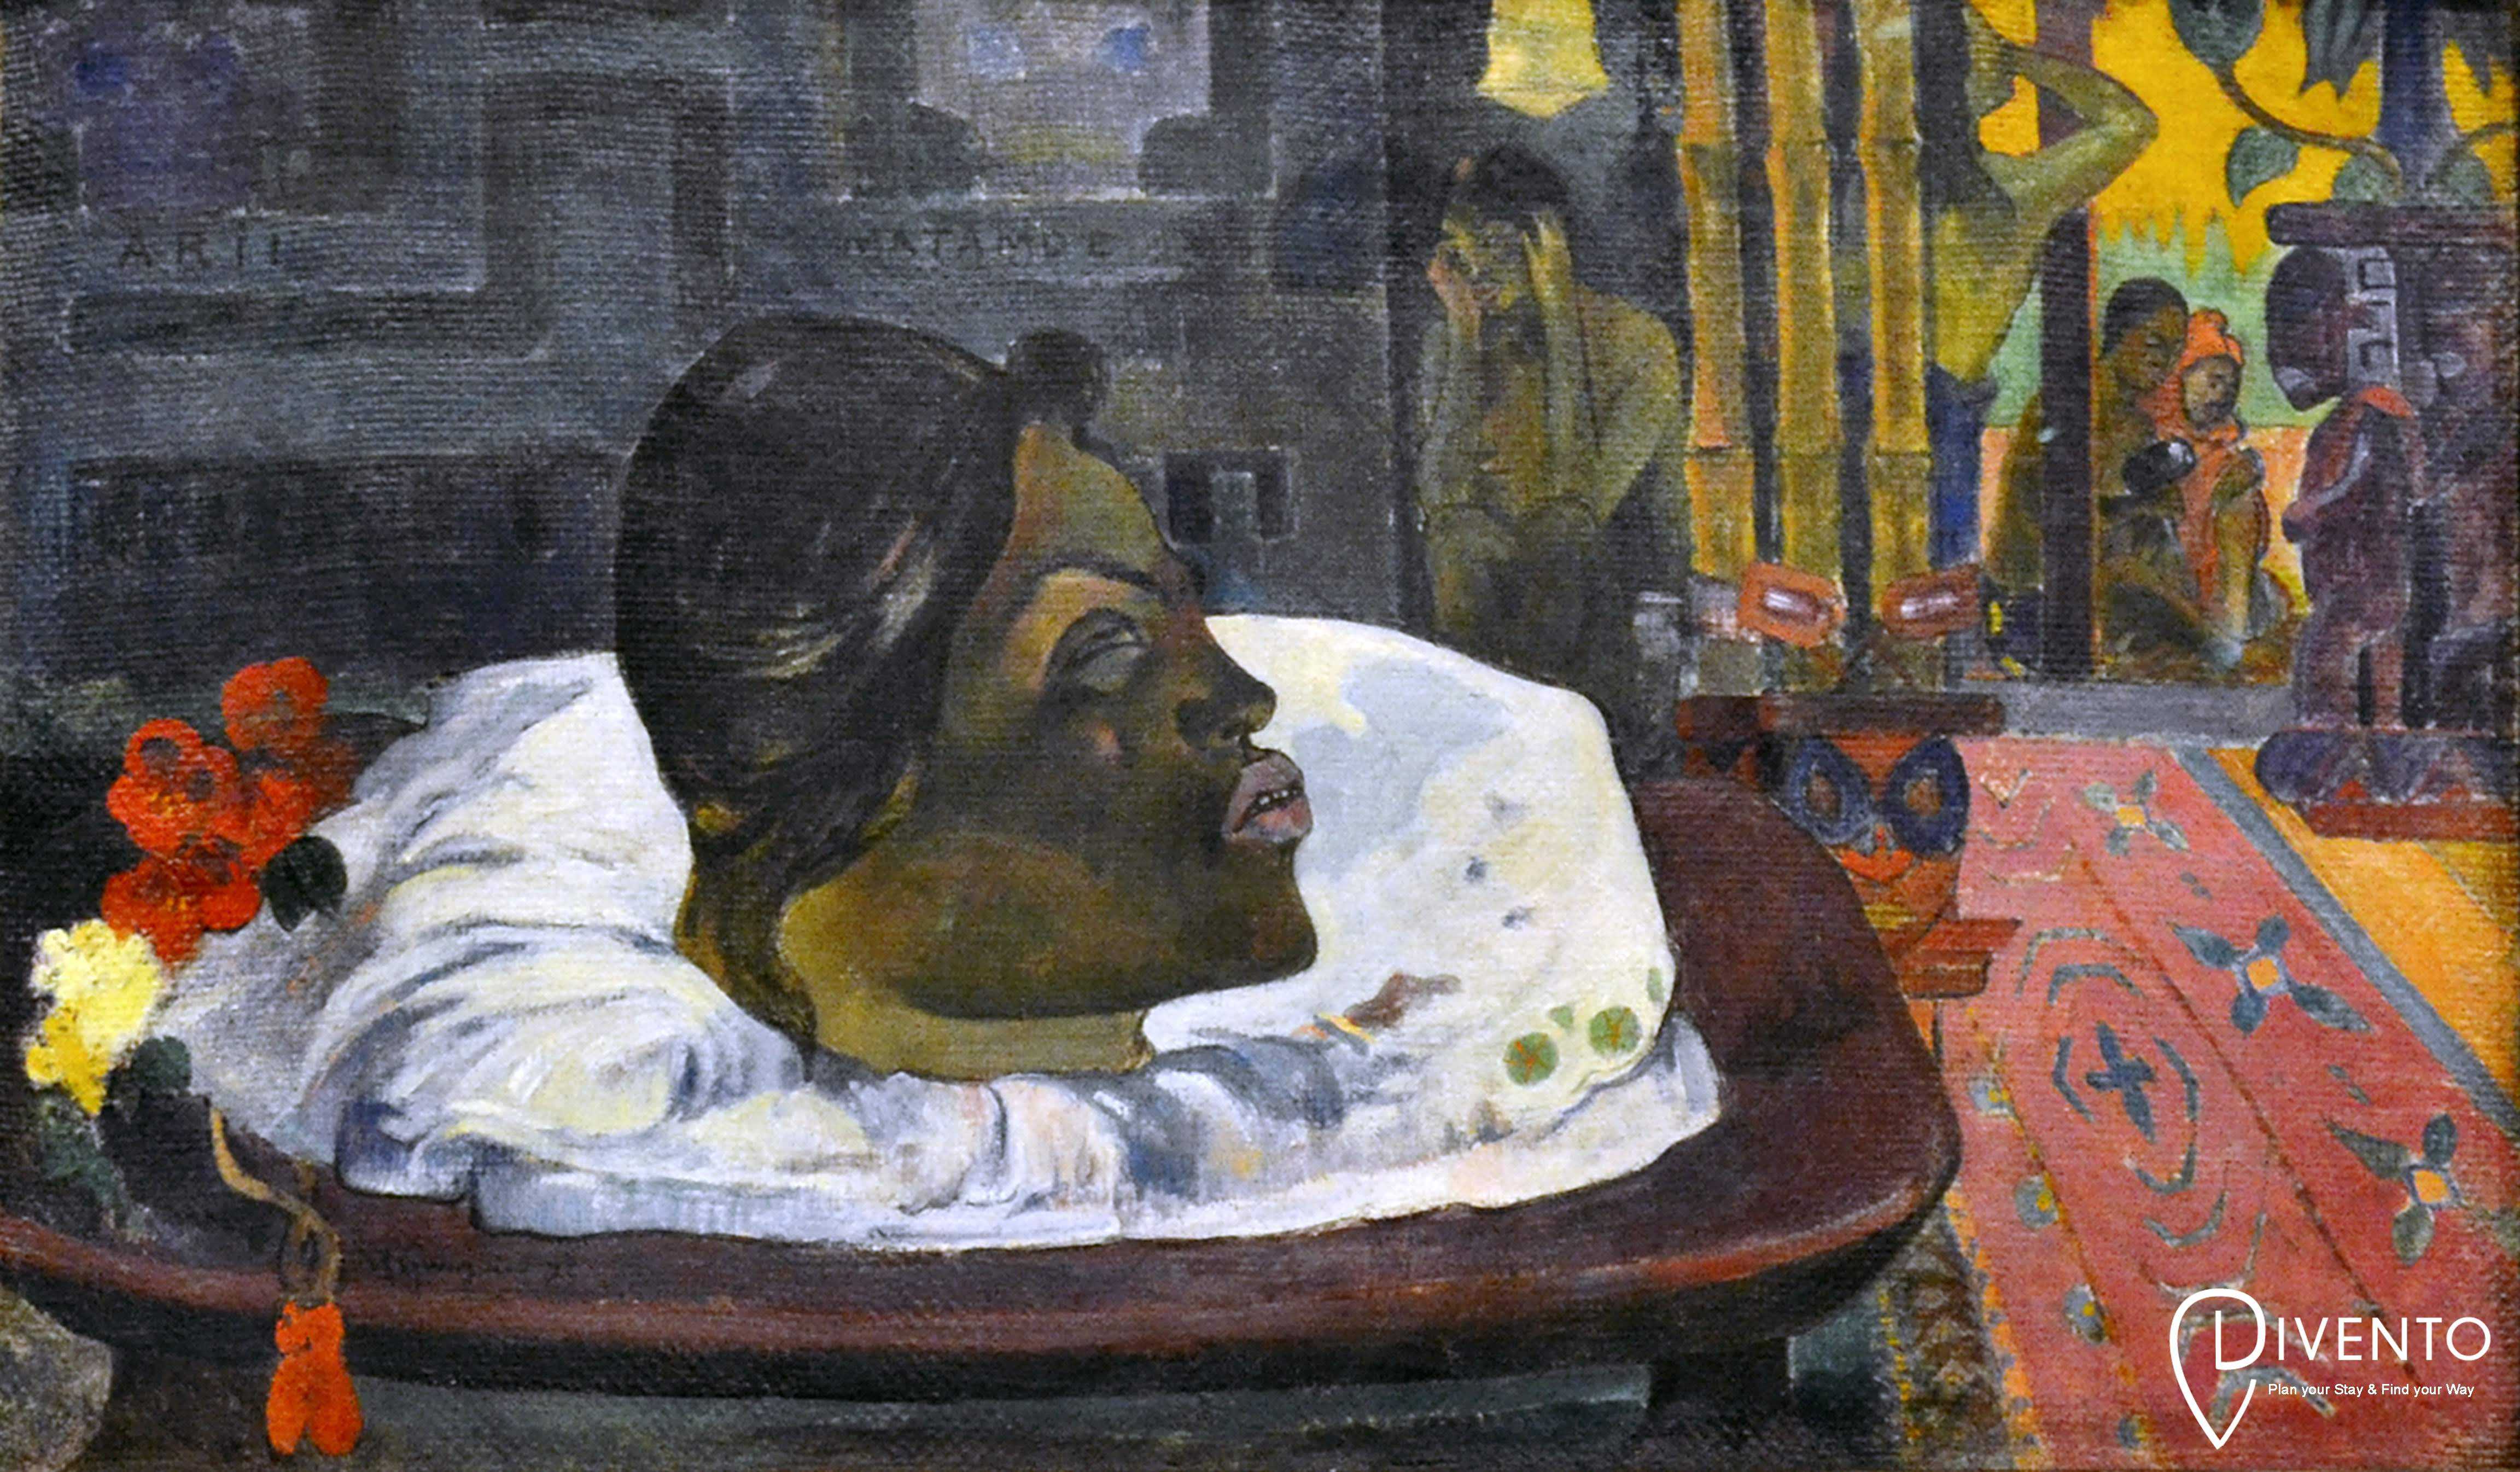 Gauguin Portraits, Exhibition, National Gallery, London: 7 October 2019 - 26 January 2020